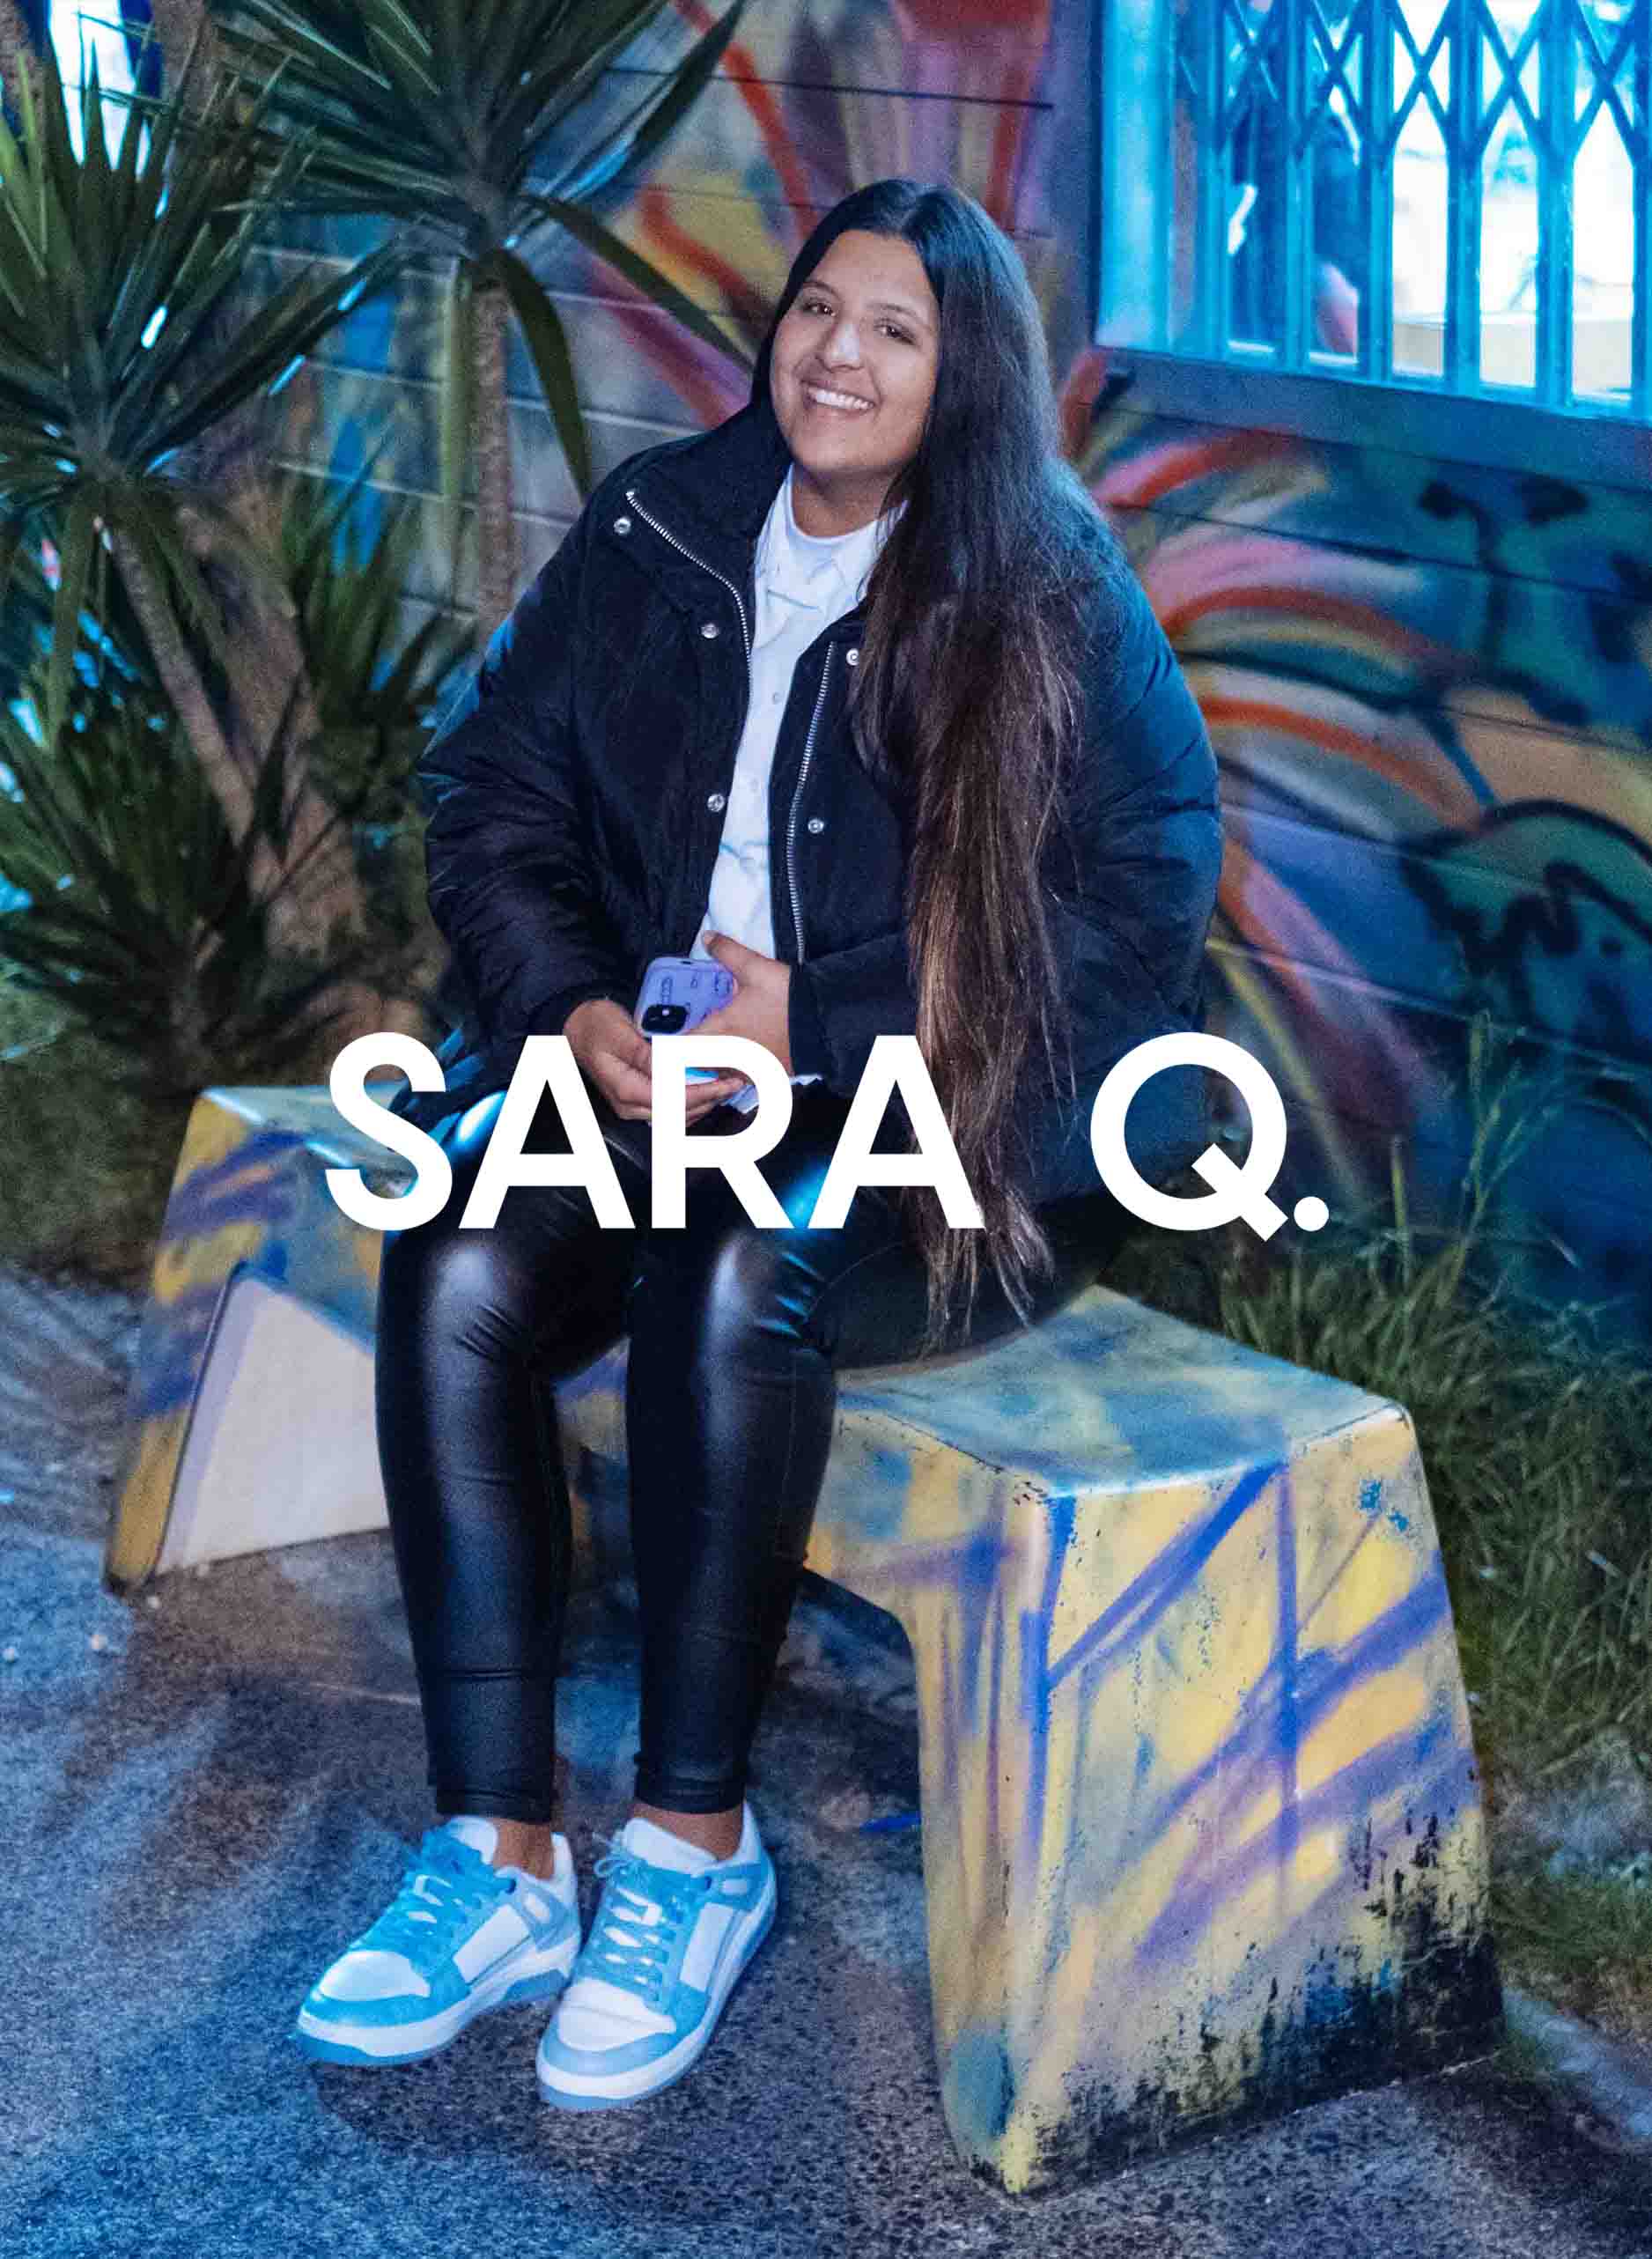 Sara sitting on a bench smiling, wearing Diverge sneakers, promoting social impact and custom shoes throught the imagine project. 